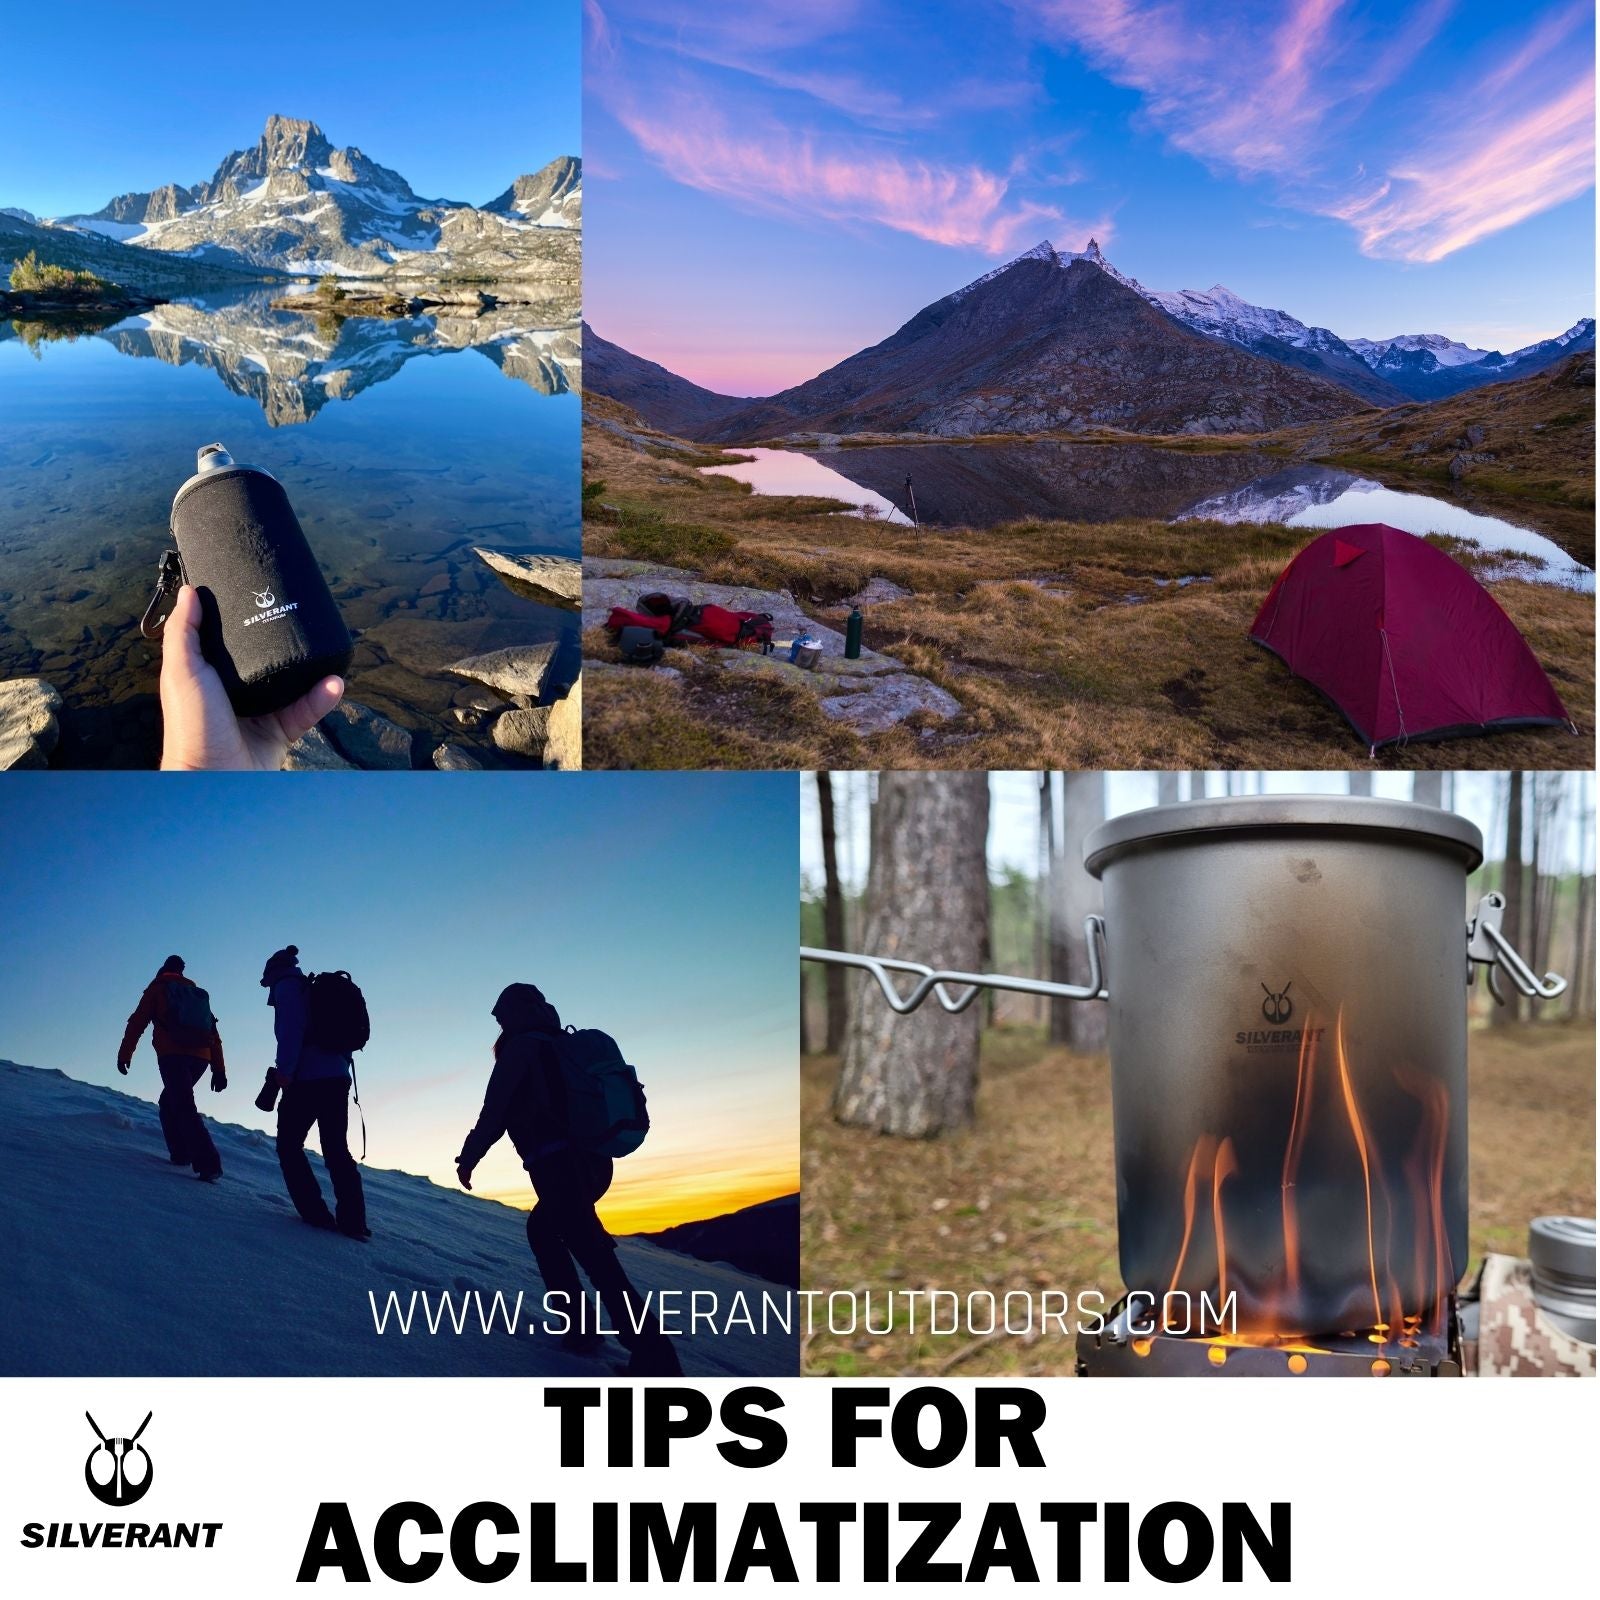 Tips for Acclimatization